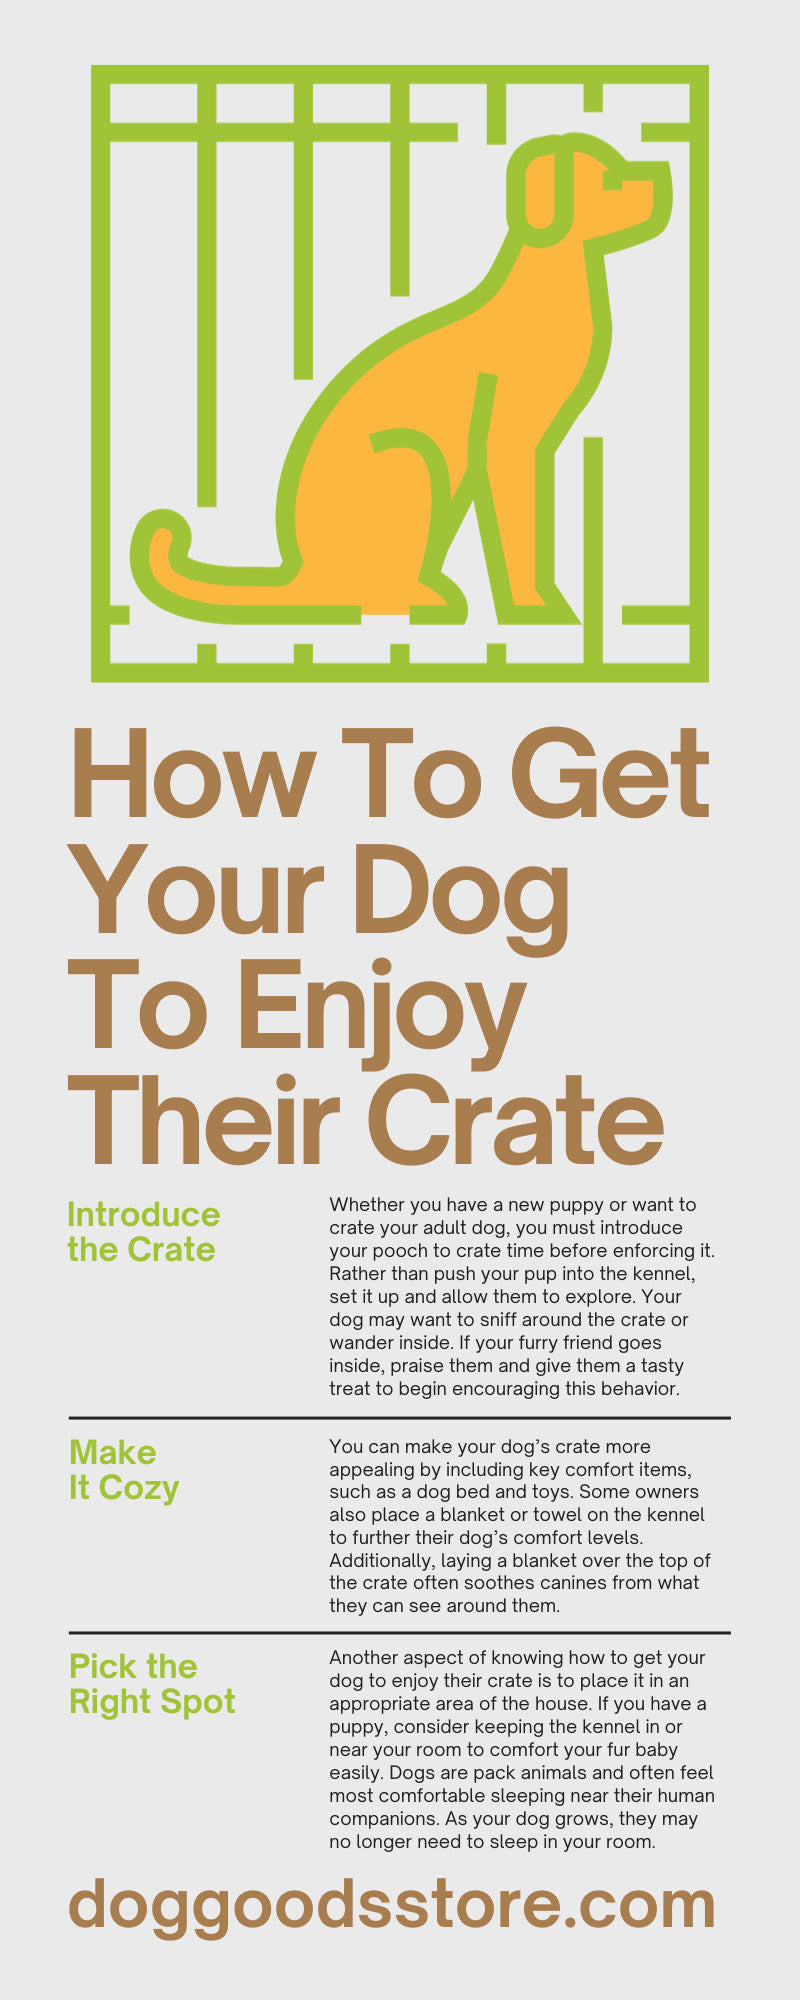 How To Get Your Dog To Enjoy Their Crate